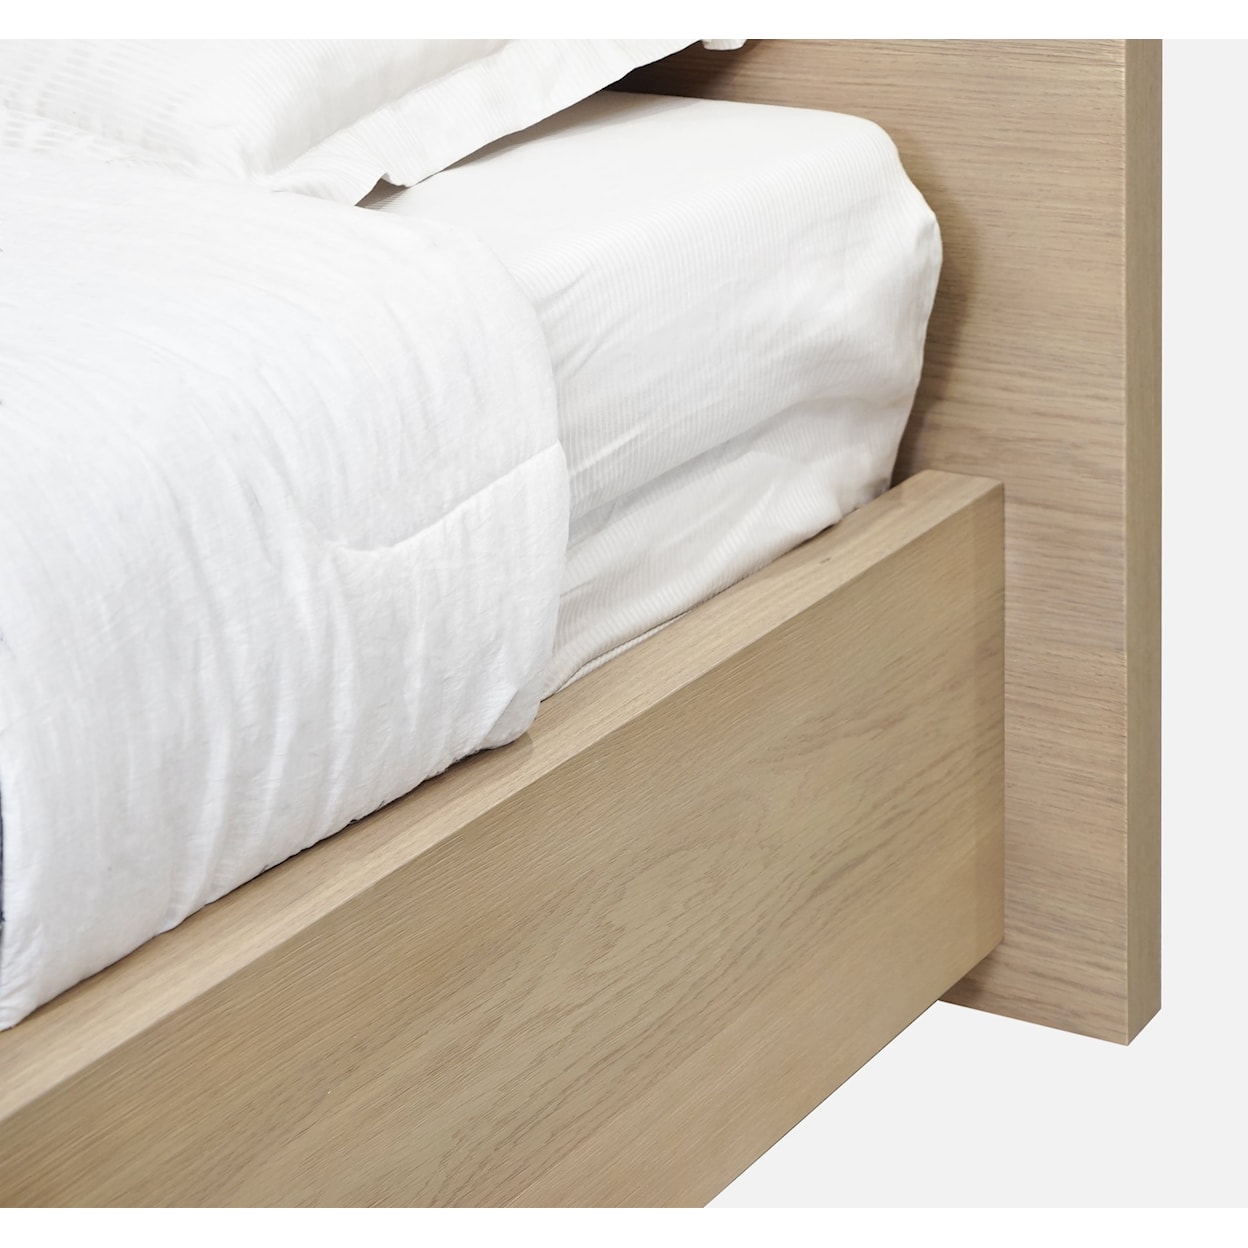 Modus International One Wood Panel Full Bed - Bisque